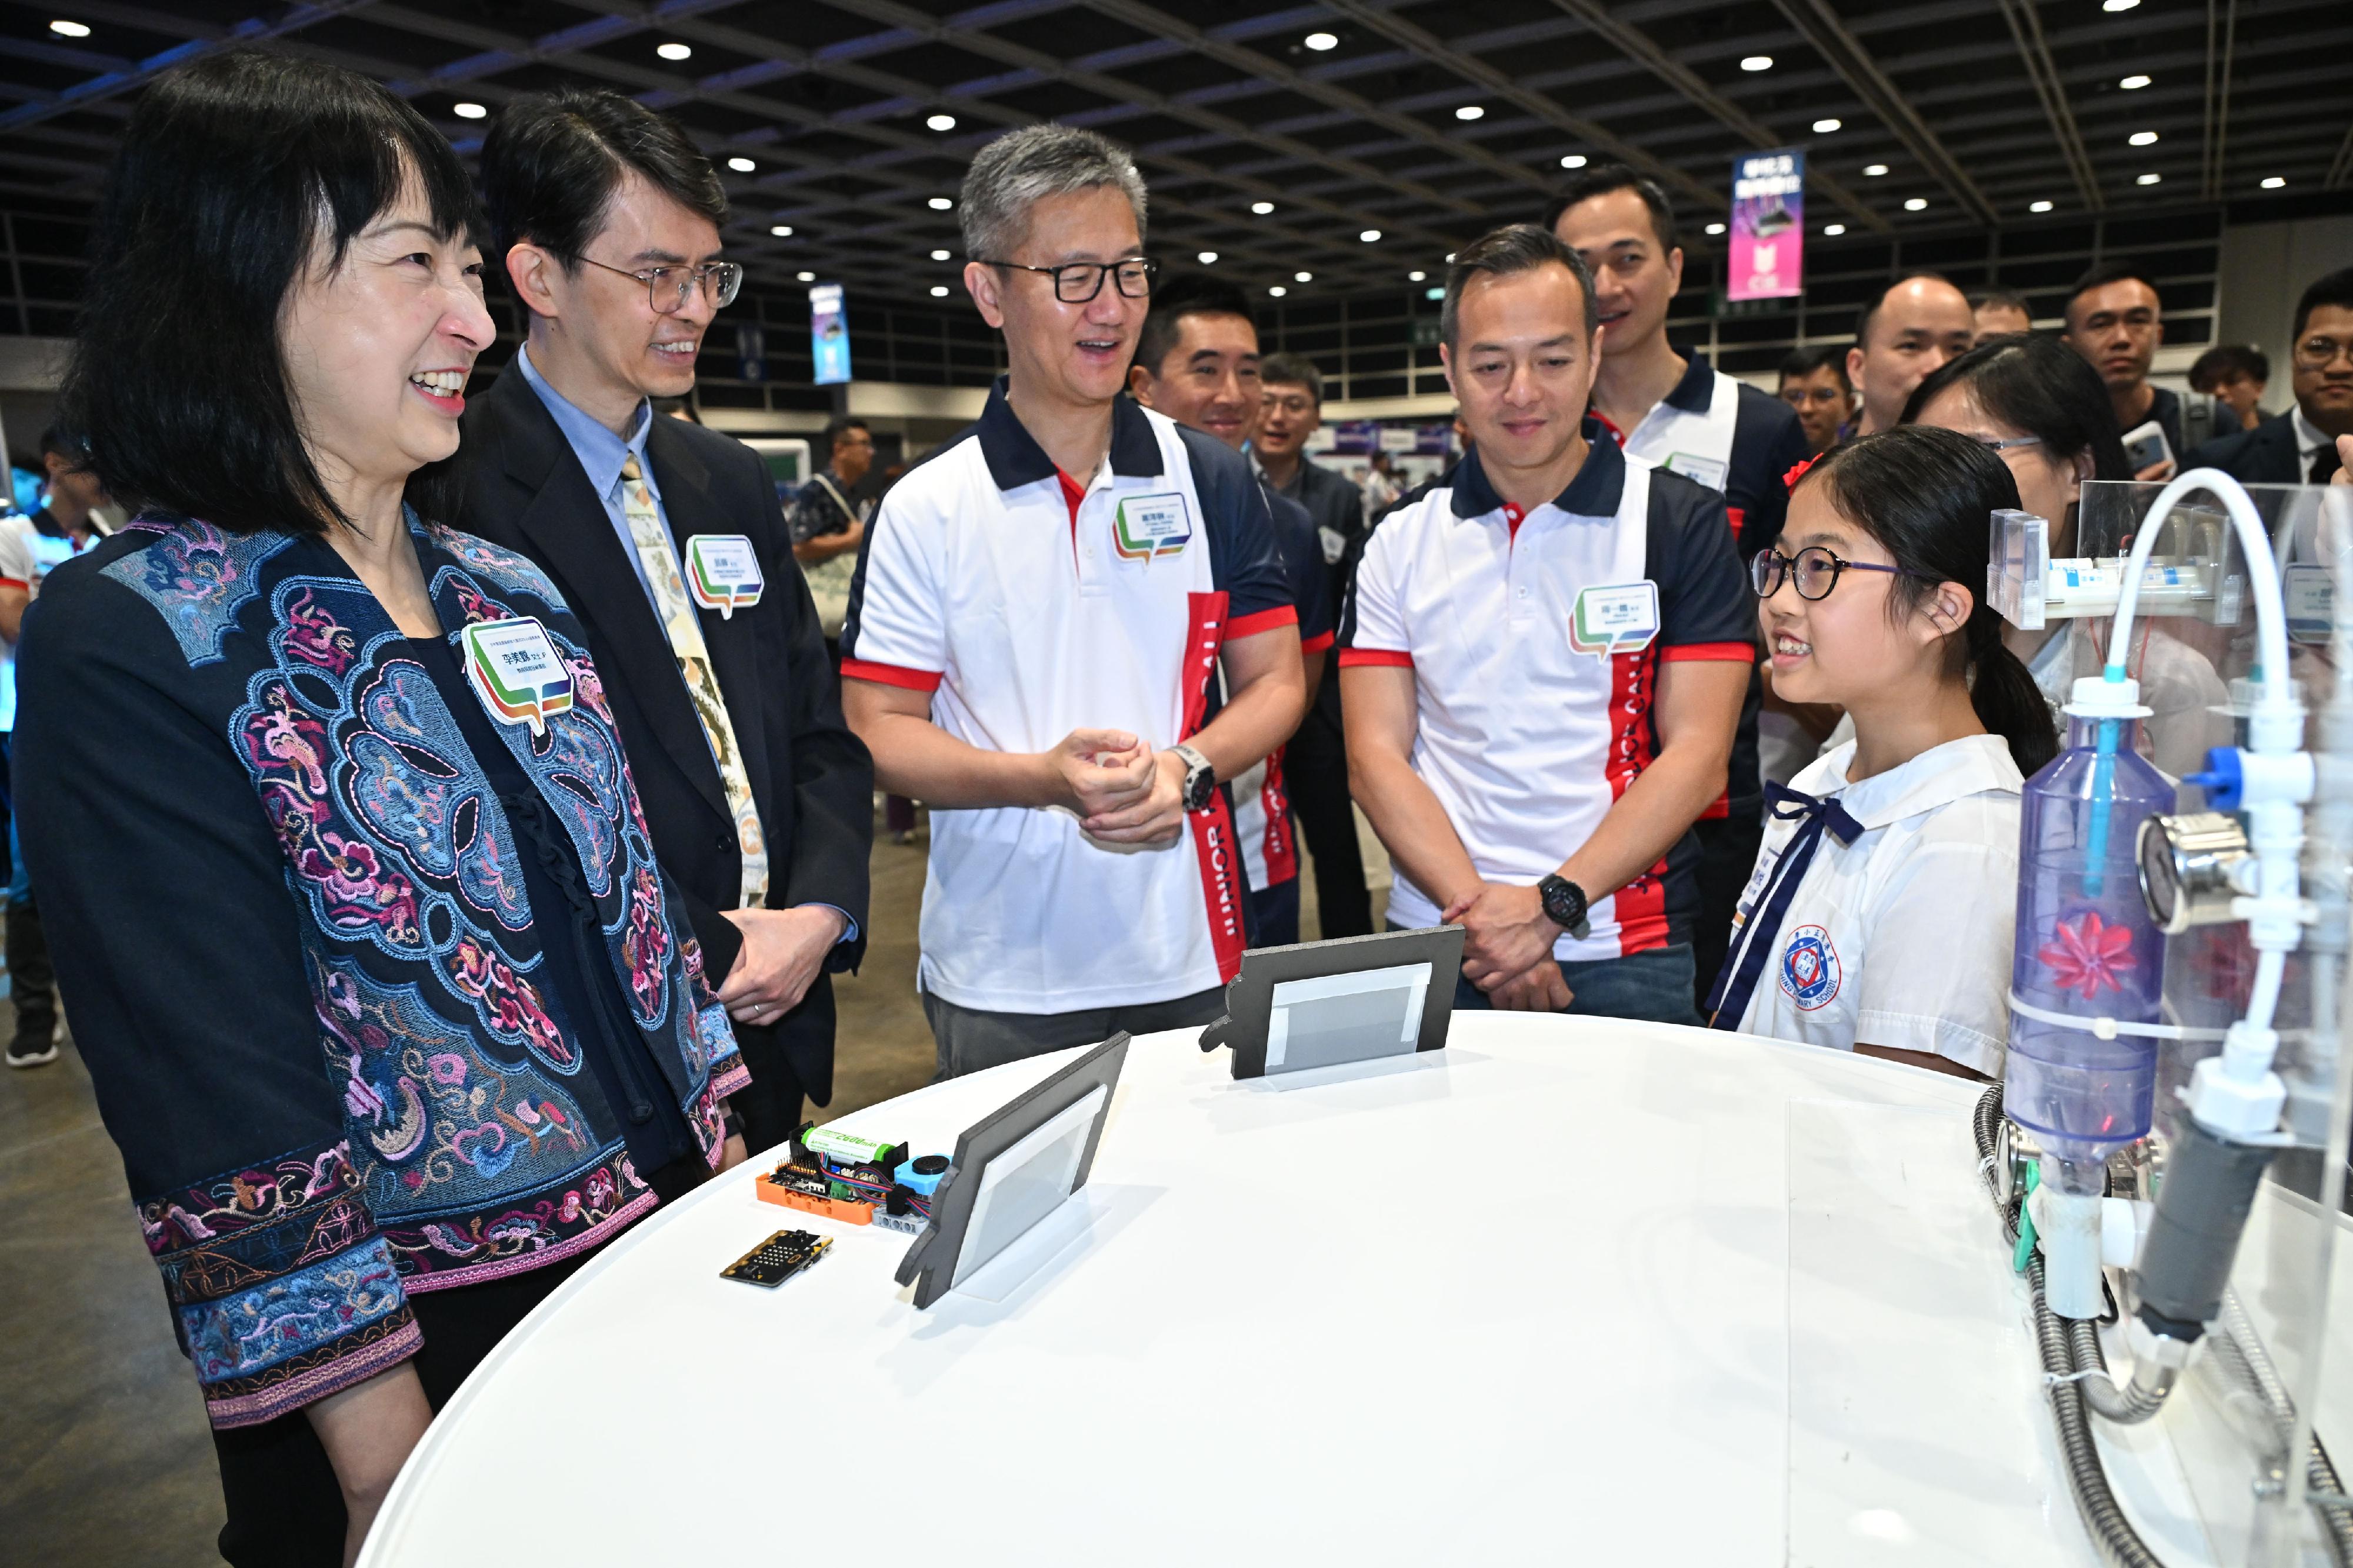 The JPC Innovation and Technology Competition 2023-24, organised by the Junior Police Call, held its award presentation ceremony at the Hong Kong Convention and Exhibition Centre today (May 11). Photo shows the champion of the senior primary category introducing her winning entry to the Commissioner of Police, Mr Siu Chak-yee (third left); the General Manager of Information Technology Department of Bank of China (Hong Kong), Mr Yung Fai (second left); the Permanent Secretary for Education, Ms Michelle Li (first left); and the Deputy Commissioner of Police (Operations), Mr Chow Yat-ming (second right).